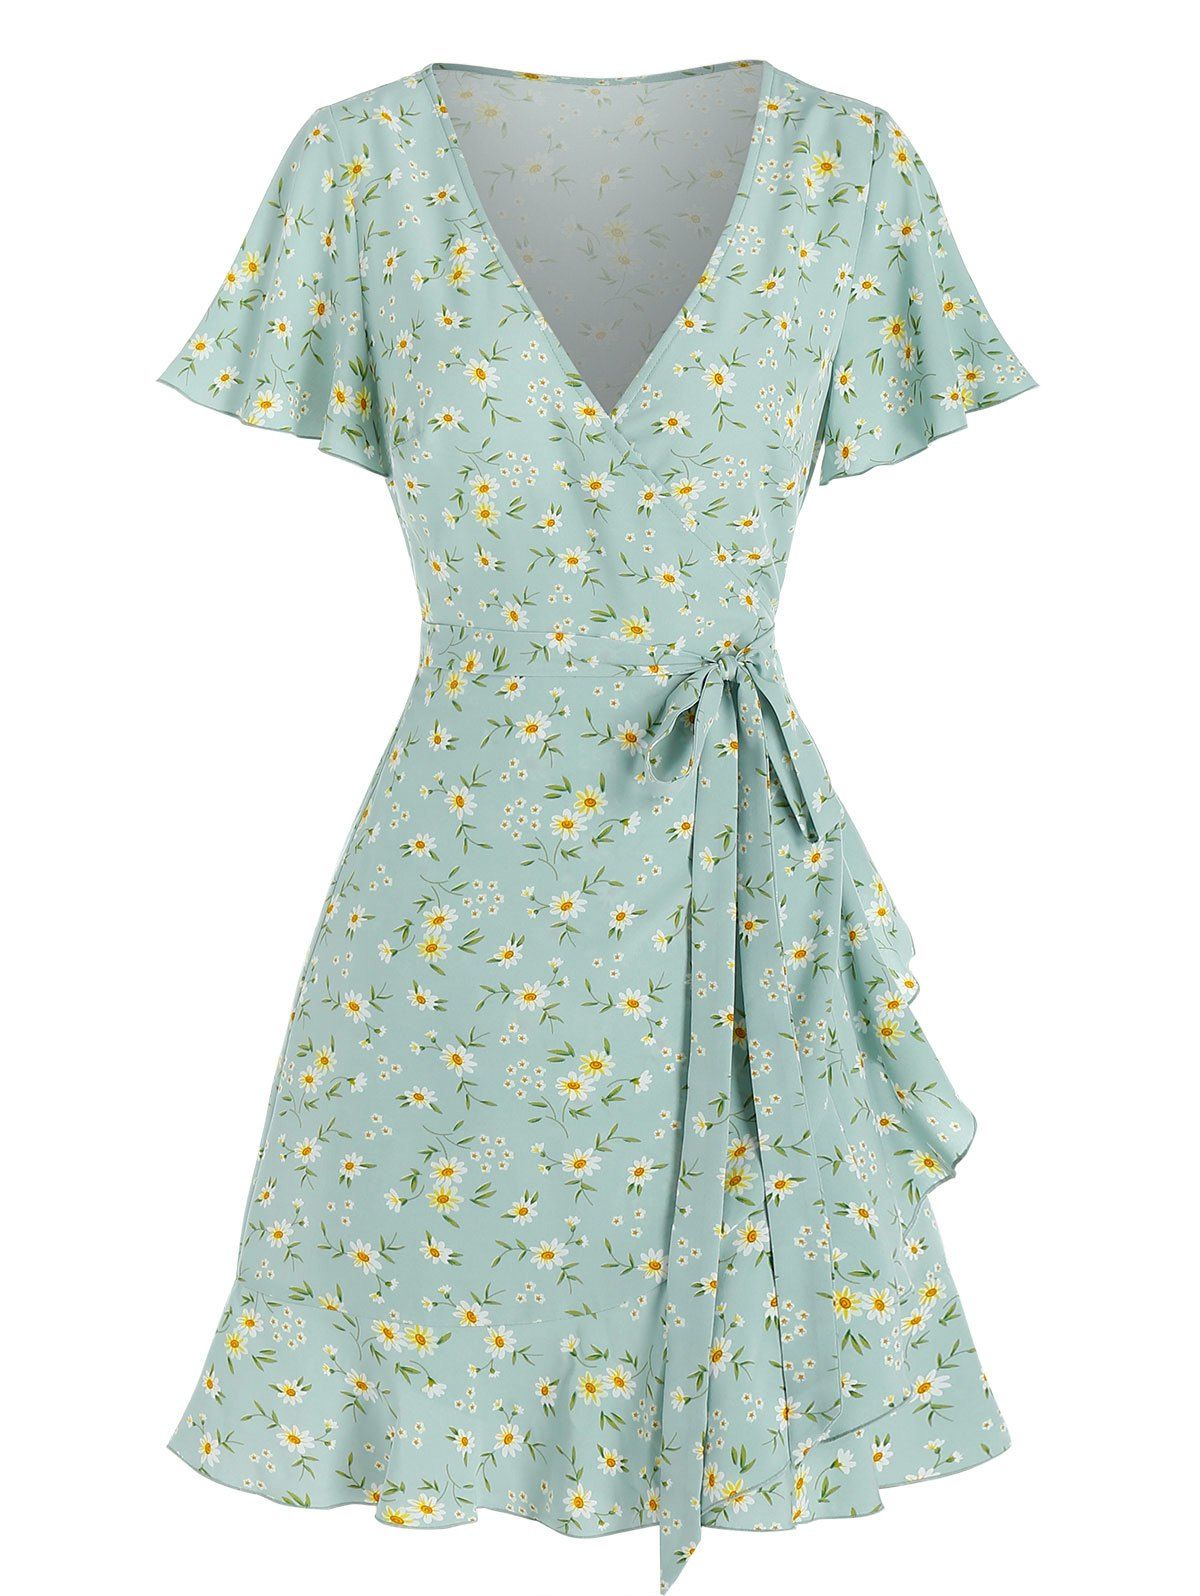 Ditsy Tiny Floral Flutter Sleeve Flounce Knotted Wrap Dress - LIGHT GREEN 2XL